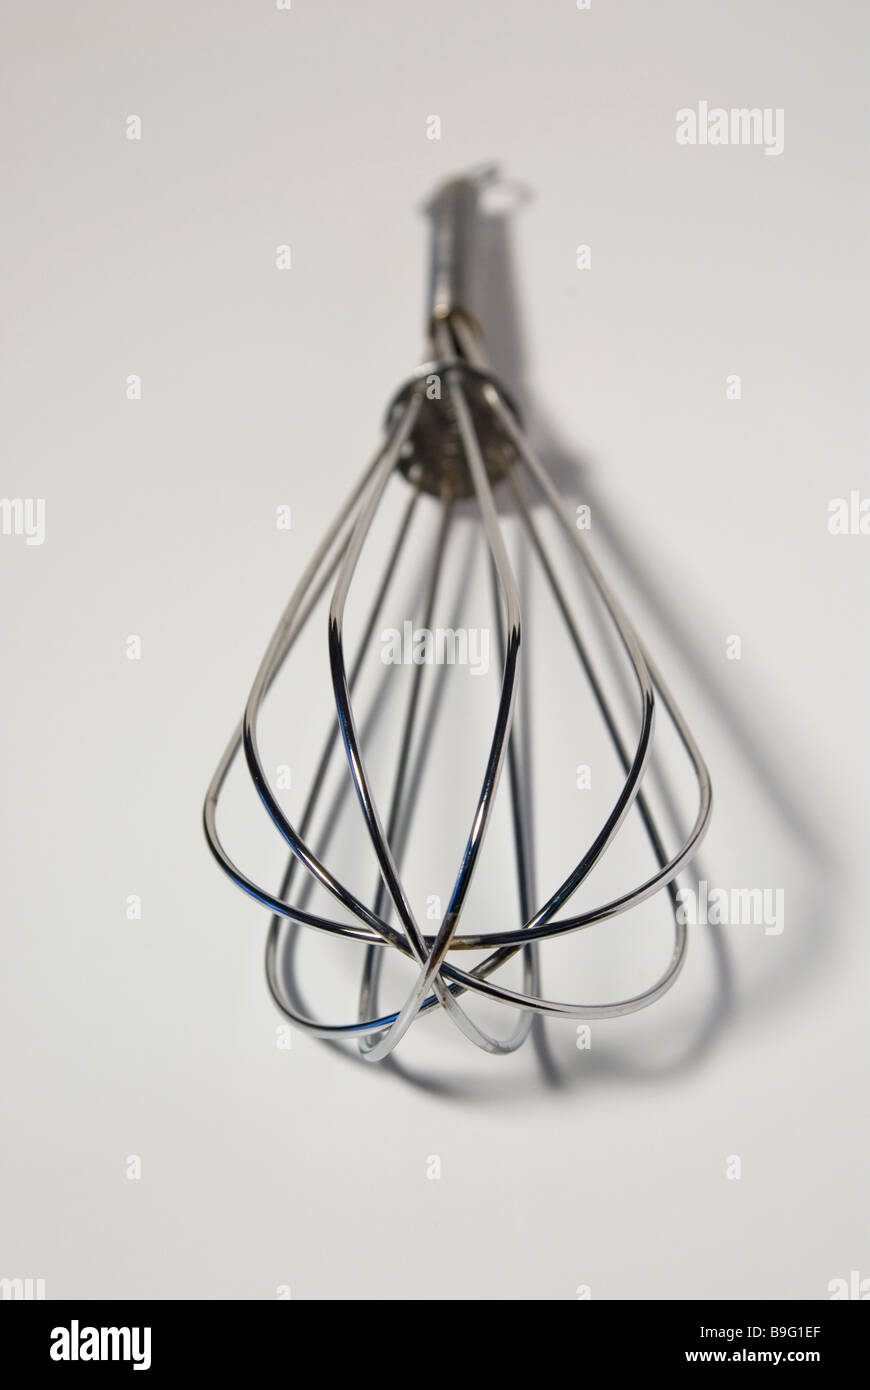 wire whisk Stock Photo